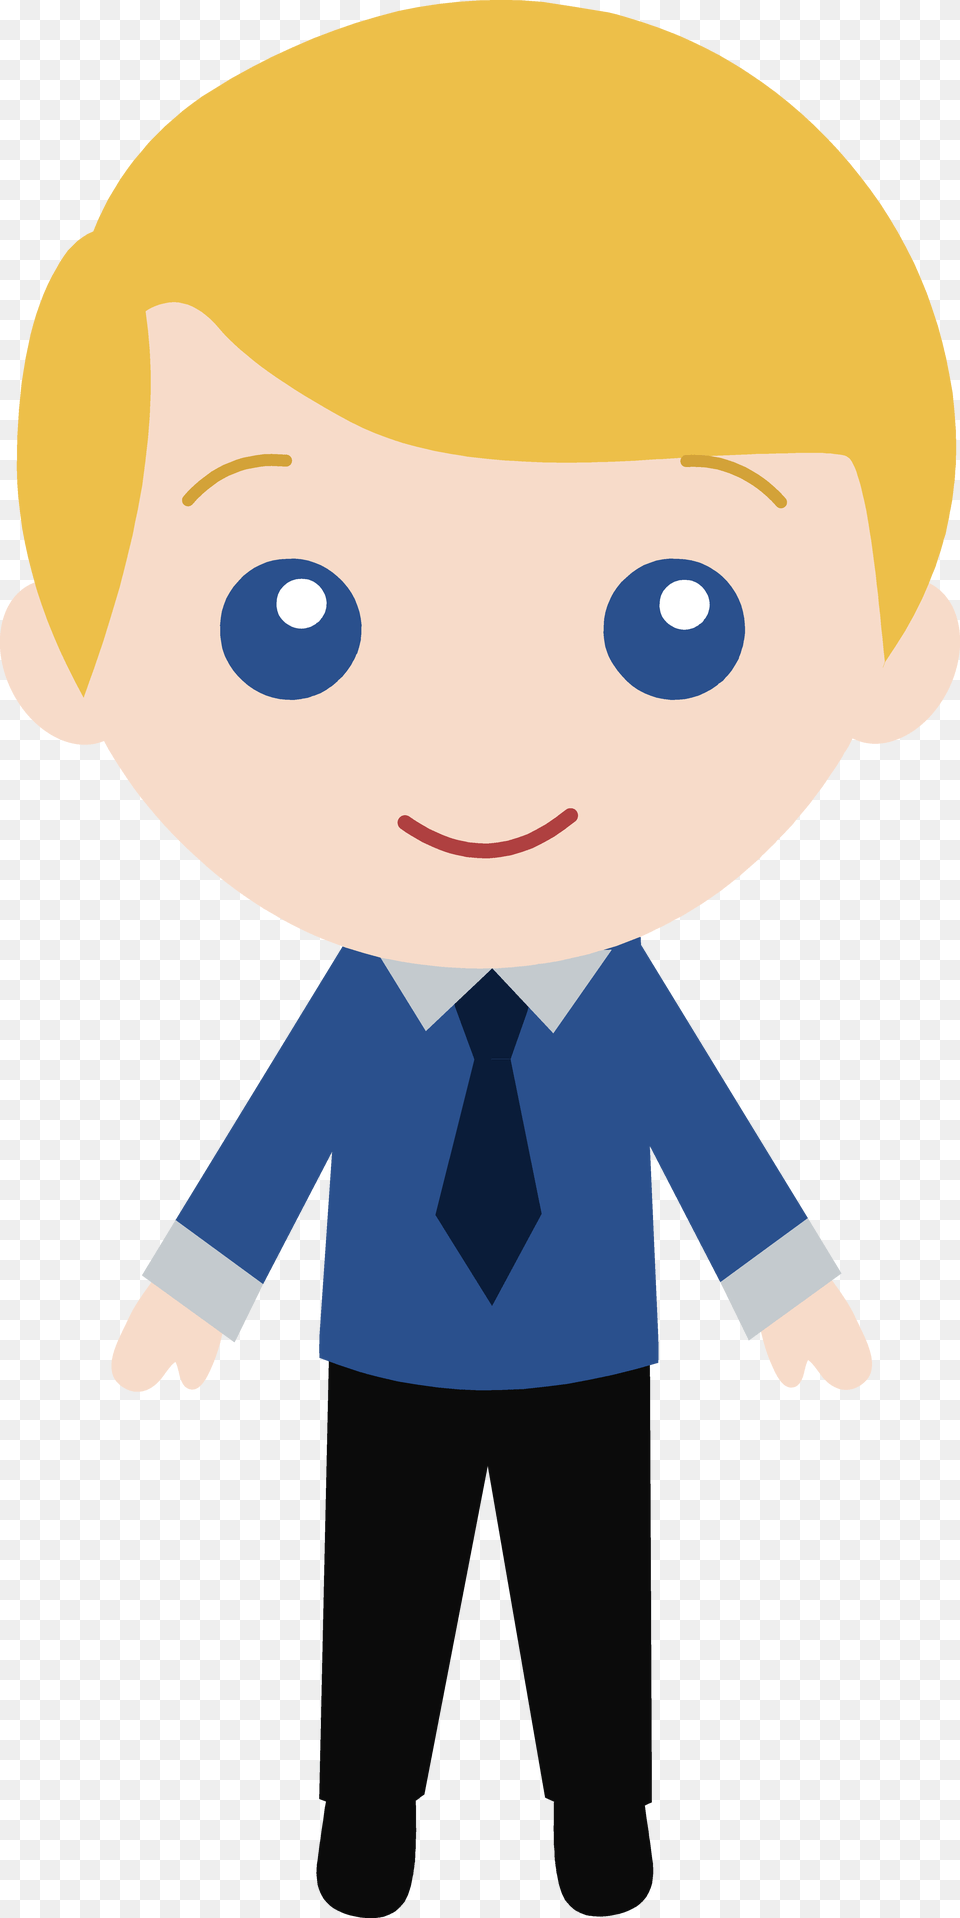 Colors Clipart Blonde Hair Blond Boy Clipart, Accessories, Formal Wear, Tie, Baby Png